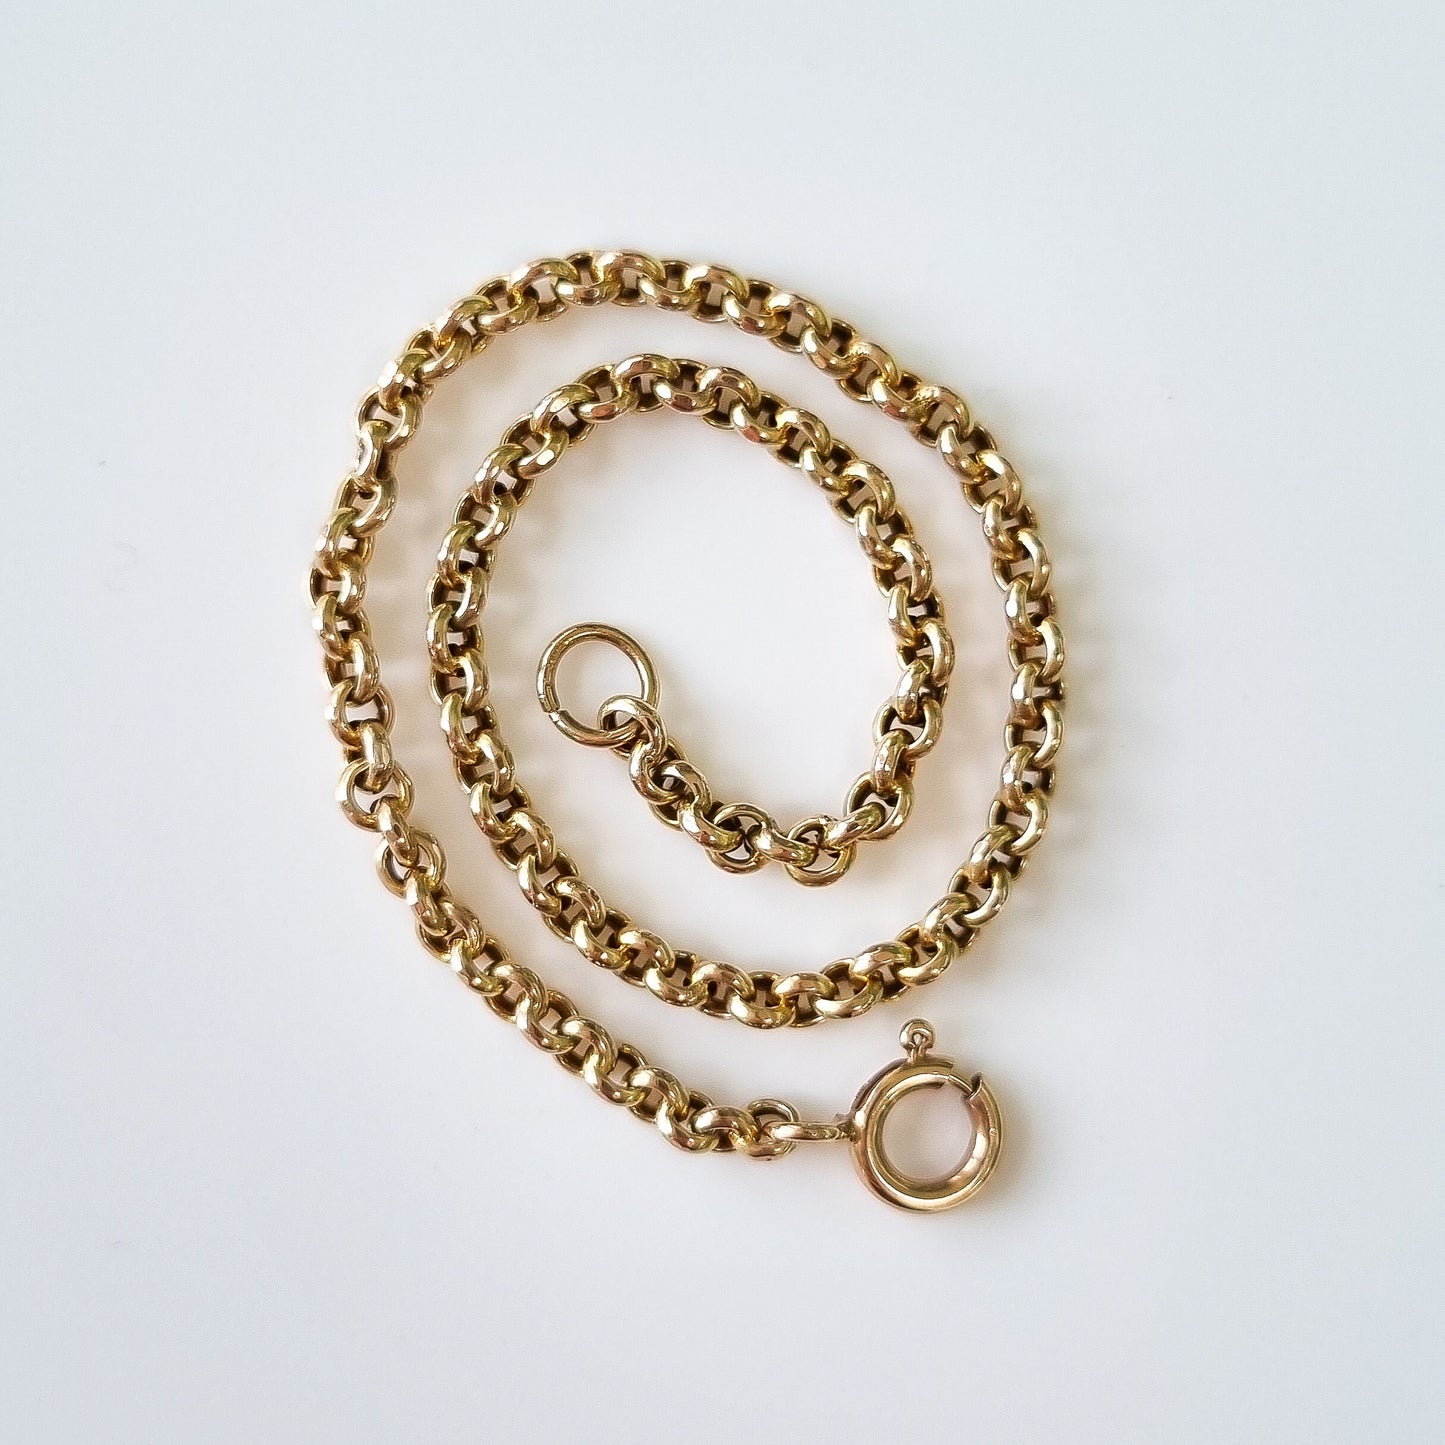 Vintage Solid 9ct Yellow Gold Rolo Link Bracelet